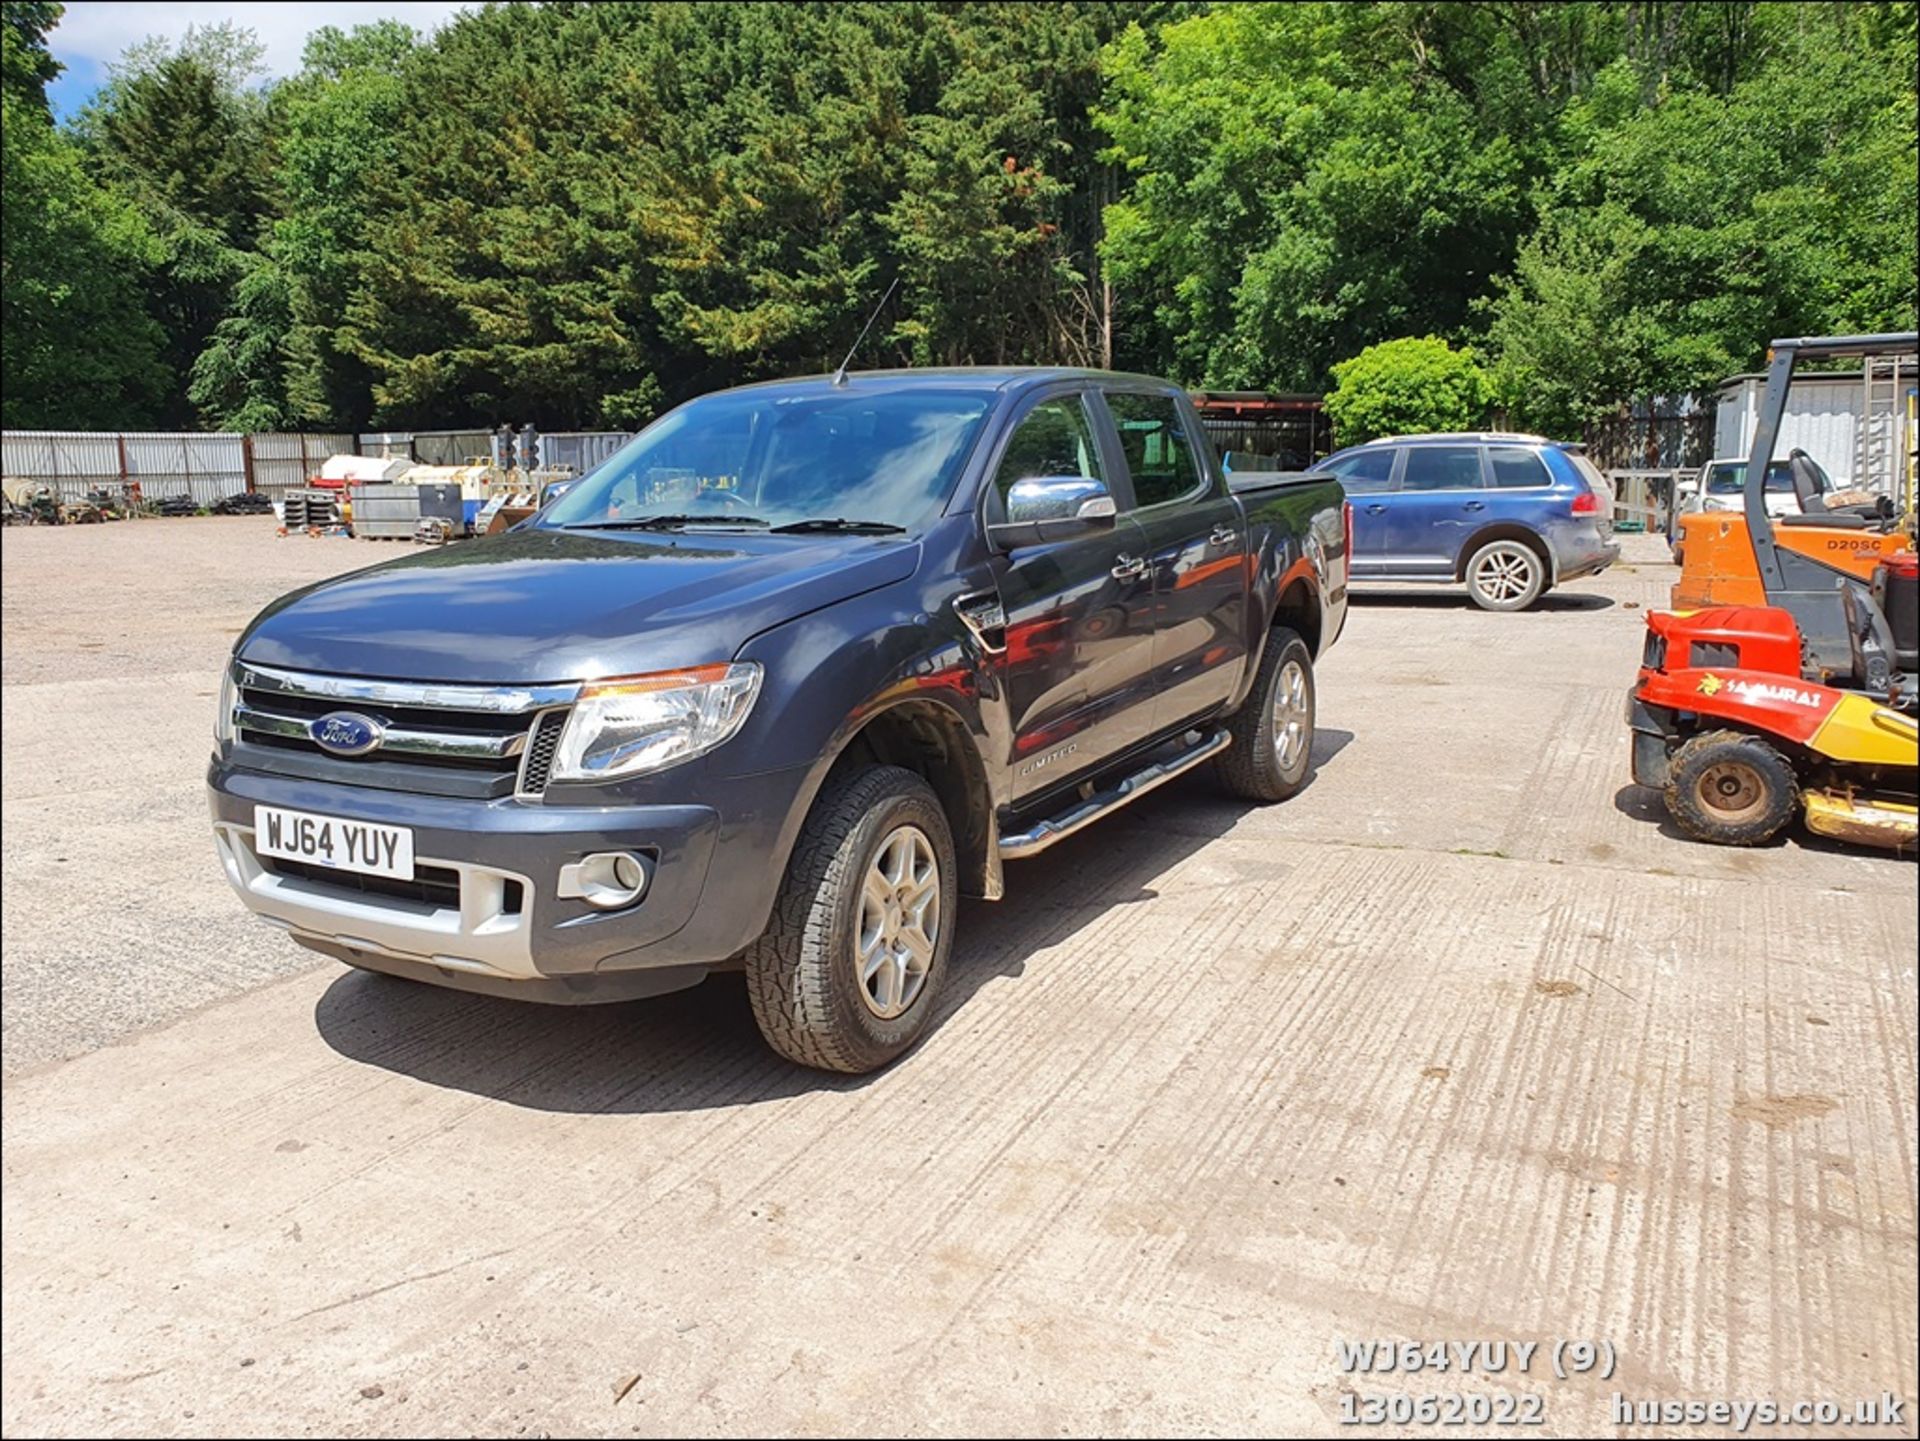 14/64 FORD RANGER LIMITED 4X4 TDCI - 2198cc 4dr 4x4 (Grey, 106k) - Image 9 of 43